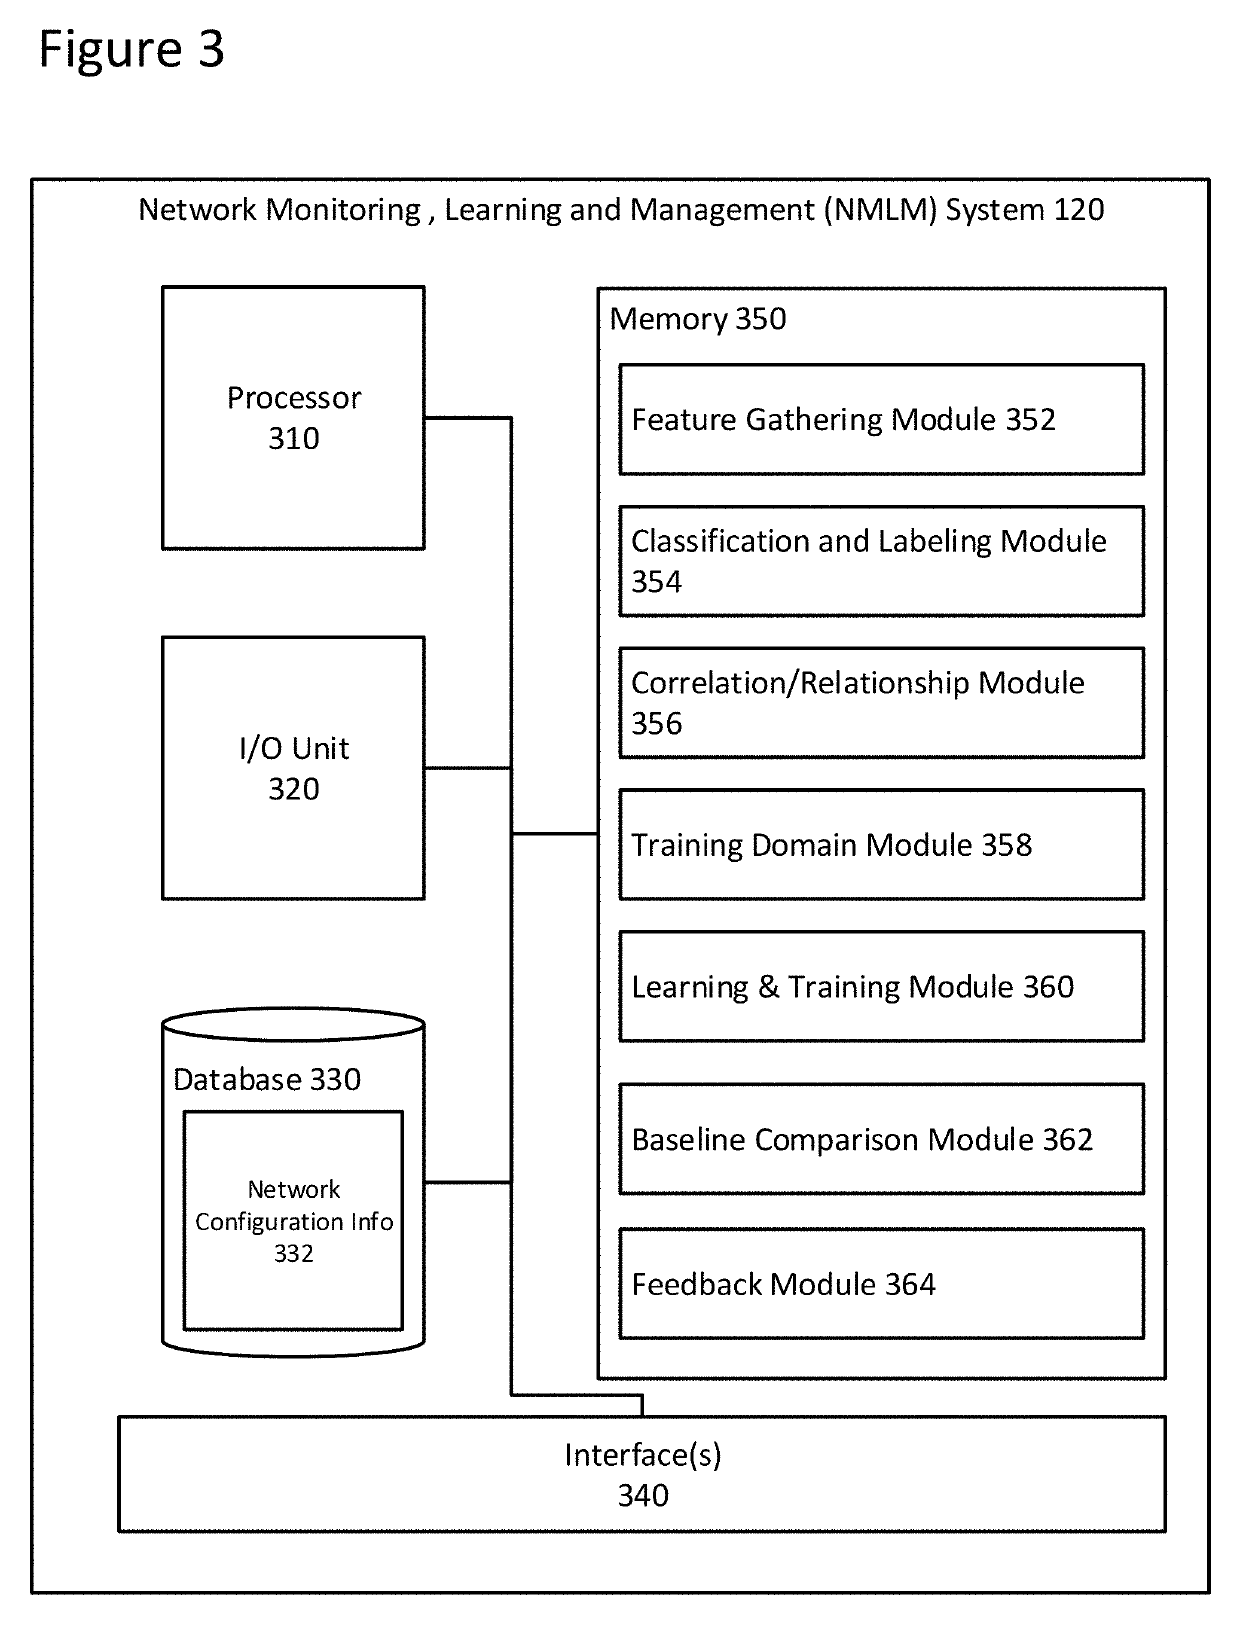 Classification and Relationship Correlation Learning Engine for the Automated Management of Complex and Distributed Networks